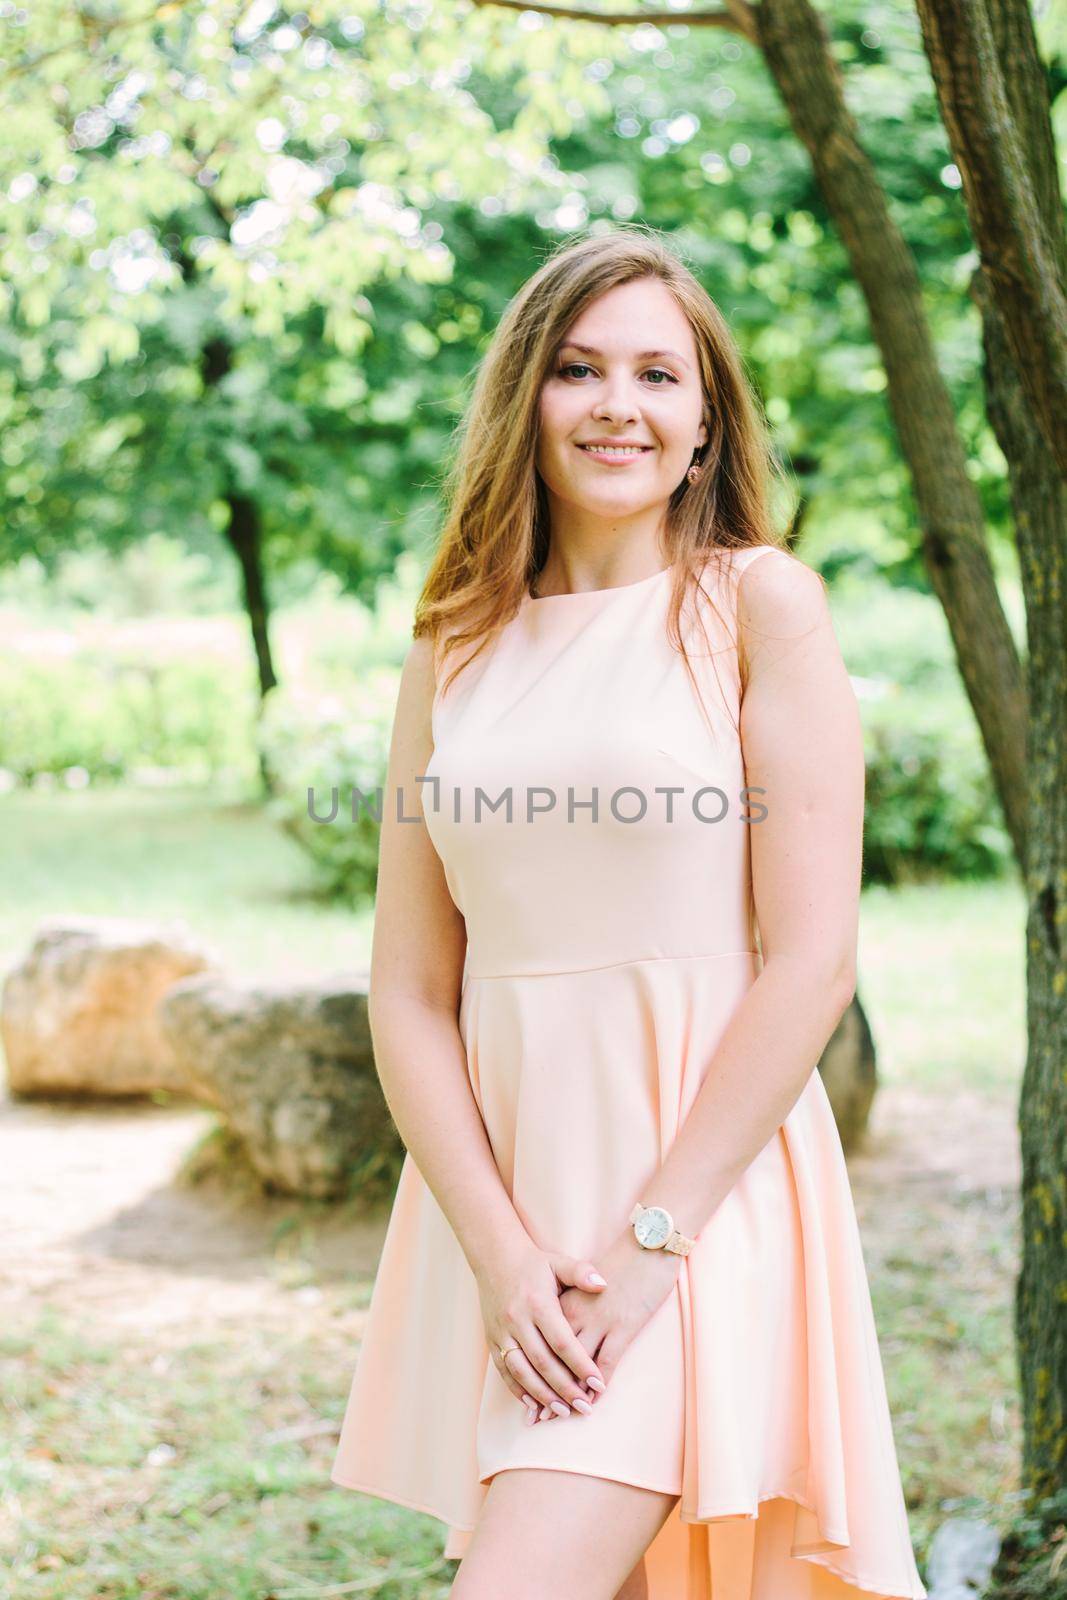 Beautiful young woman standing at a park and smiling